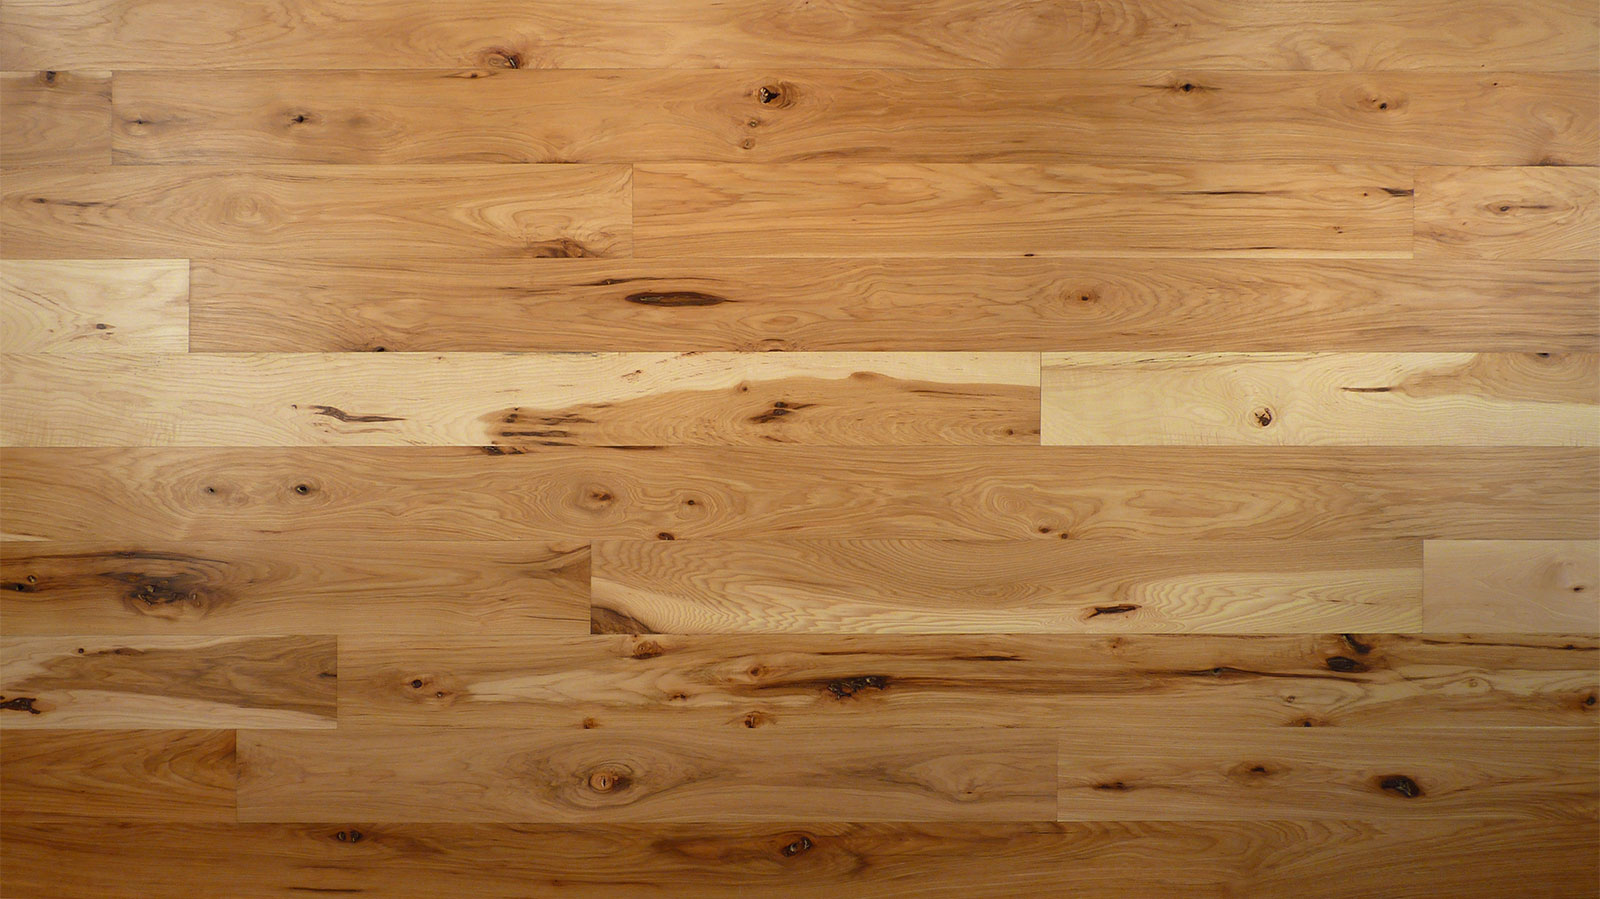 Muscanell S Hickory Quality Hardwoods, Knots In Hardwood Flooring